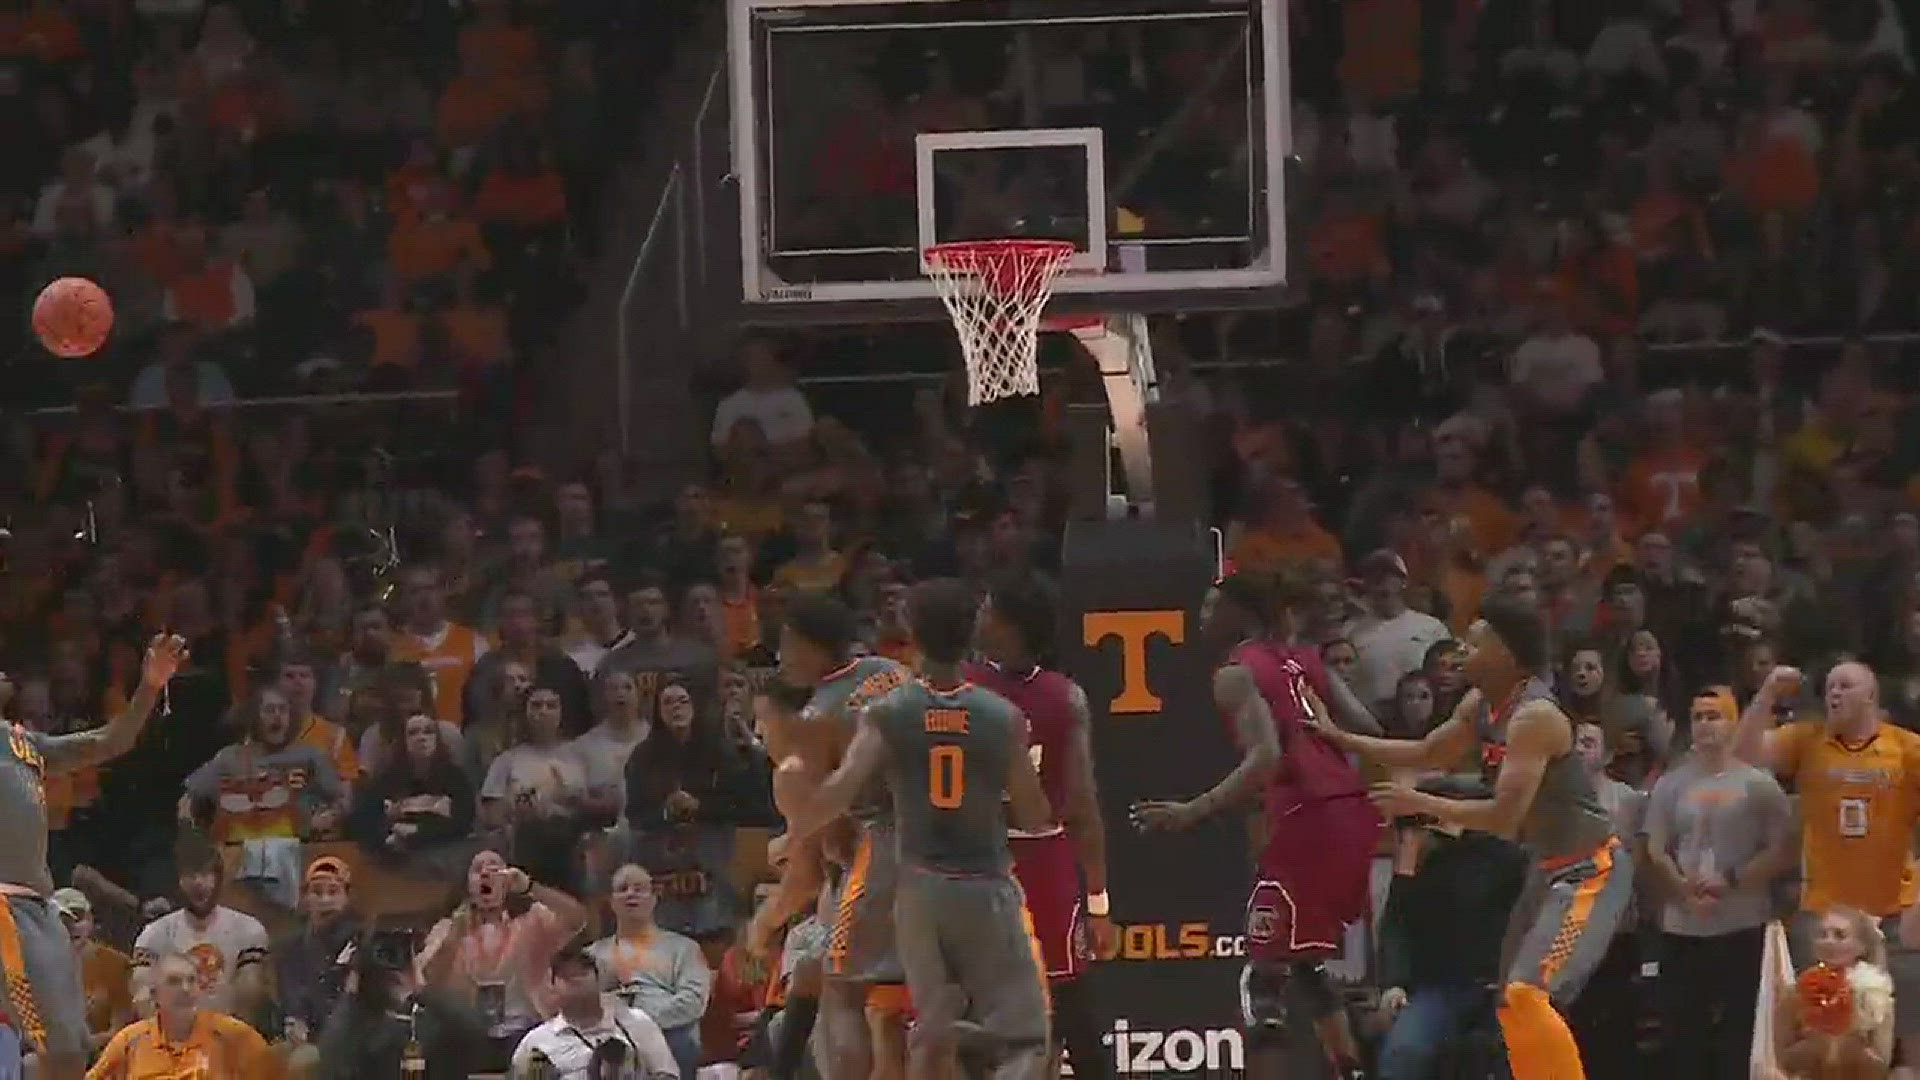 Tennessee freshman forward Grant Williams had three blocks in less than a minute towards the end of the first half of the Vols game against South Carolina on Wednesday.